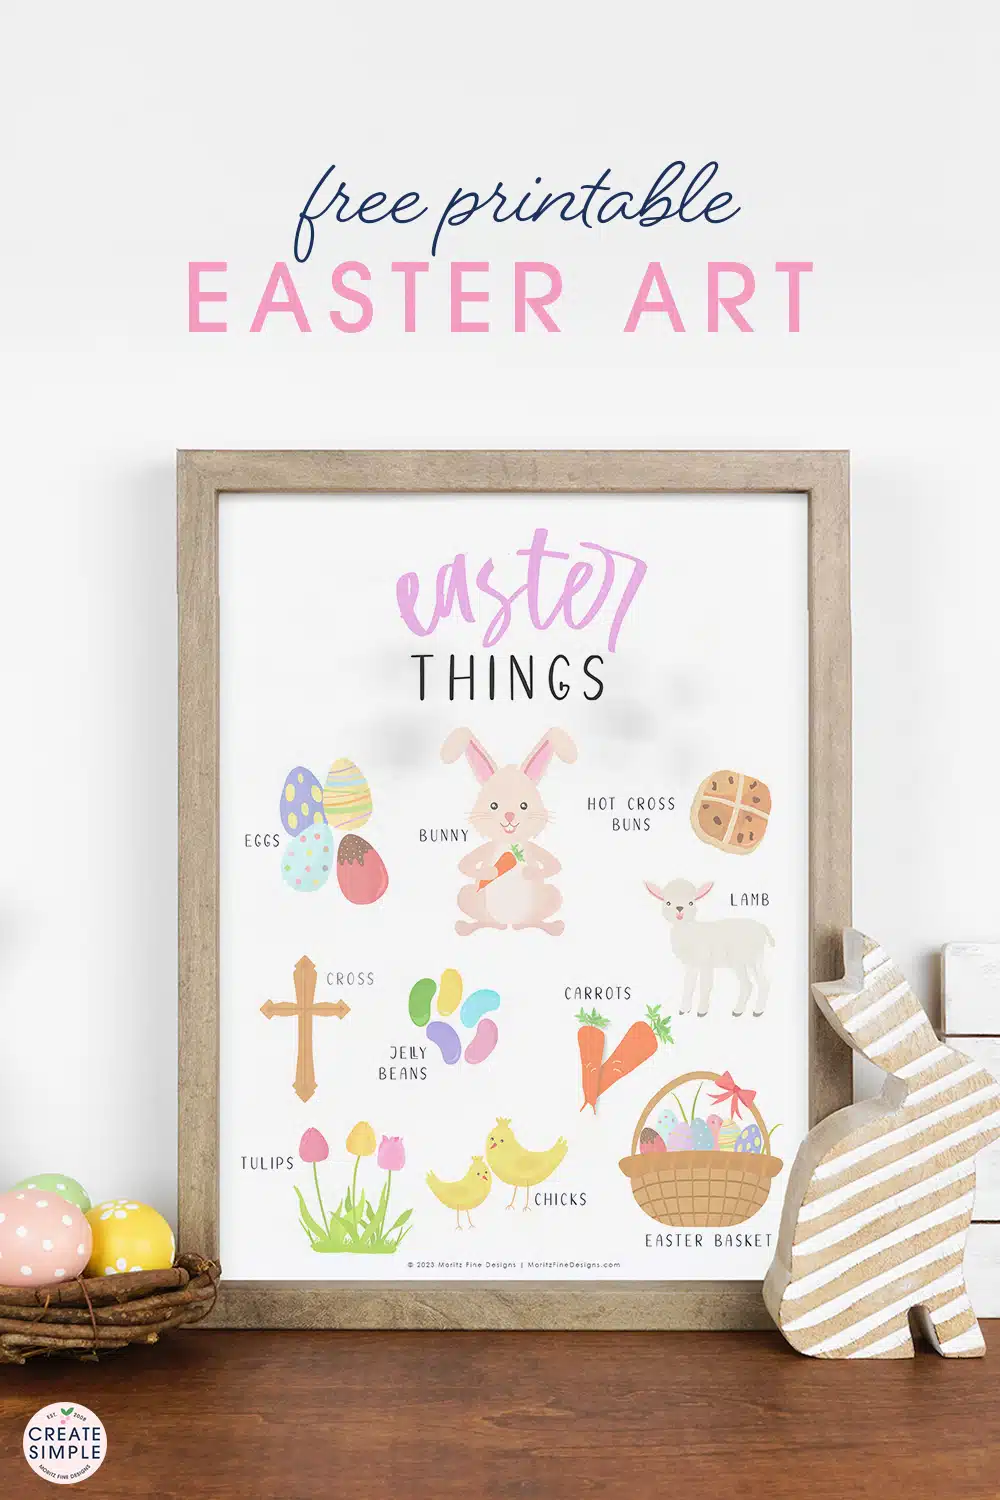 Add Easter decorations to your home in just minutes with this free downloadable printable art. Simply download, print and hang!